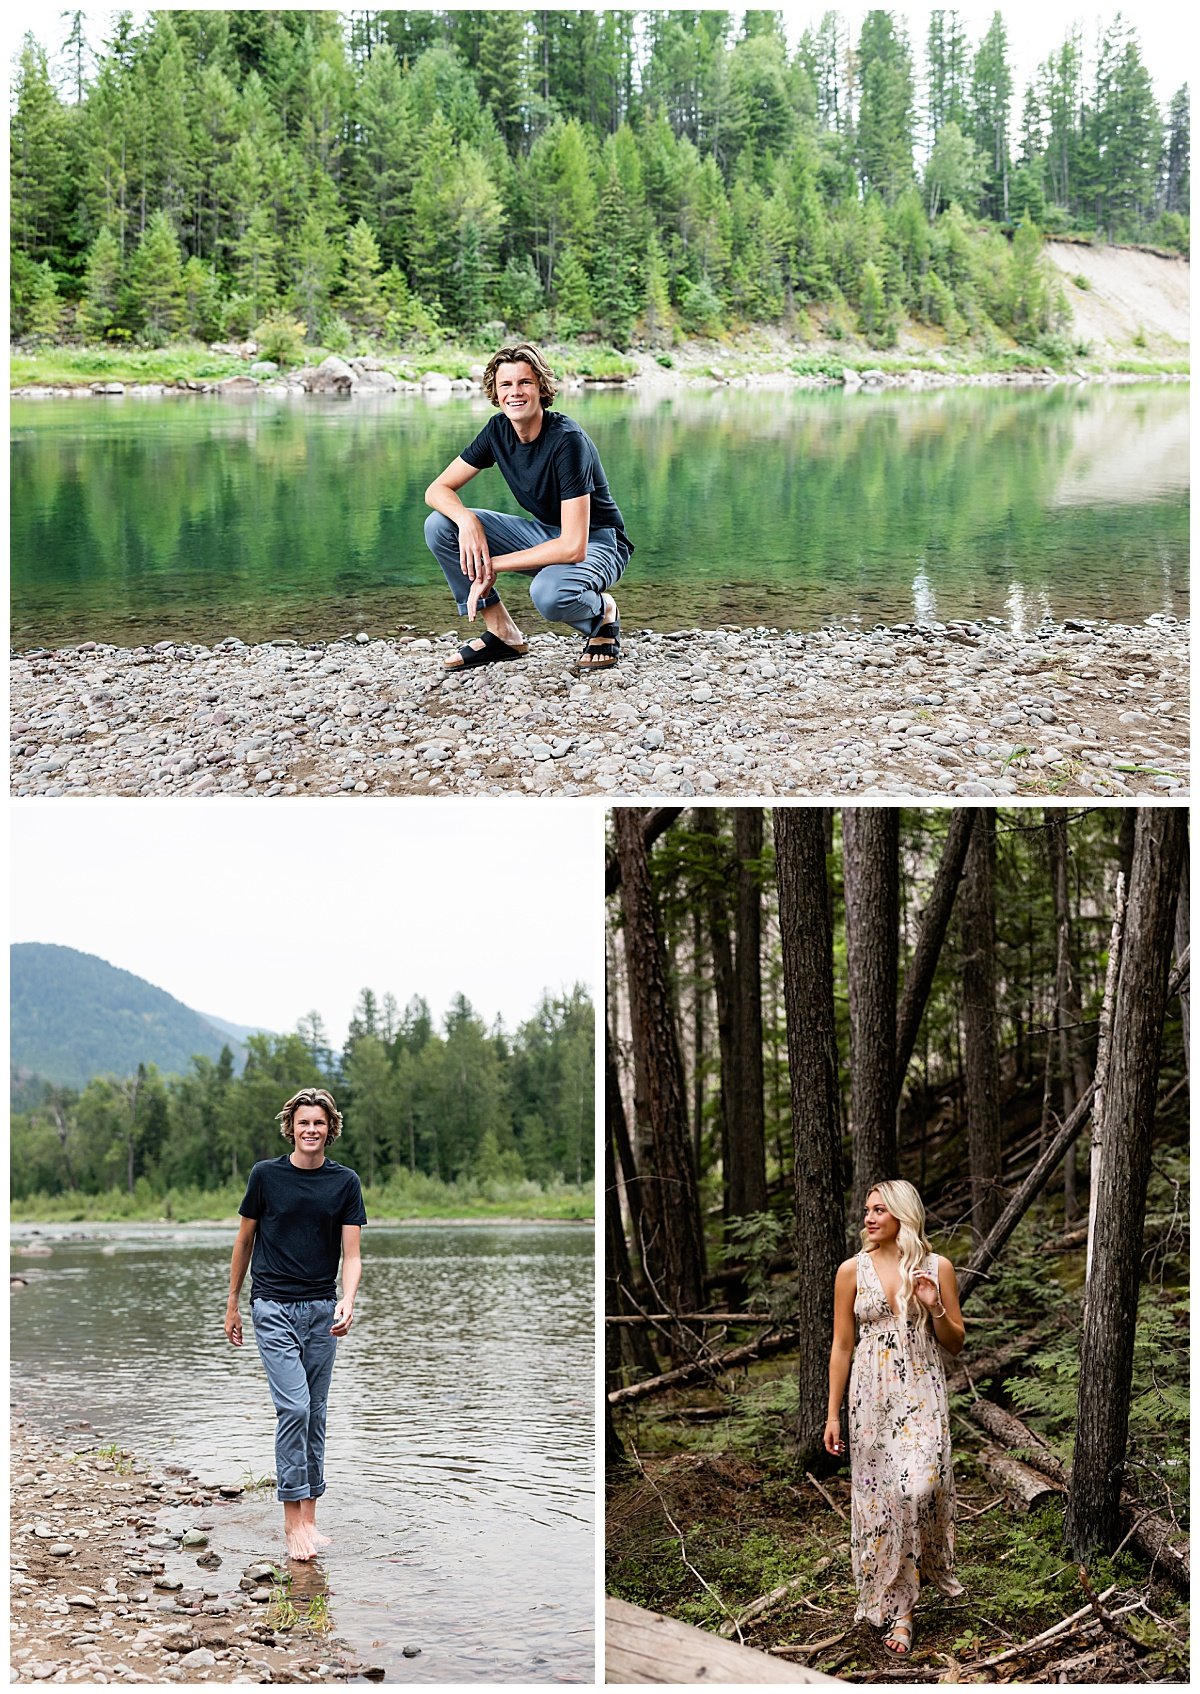 Two high school seniors pose near the trees and waters of Glacier National Park.